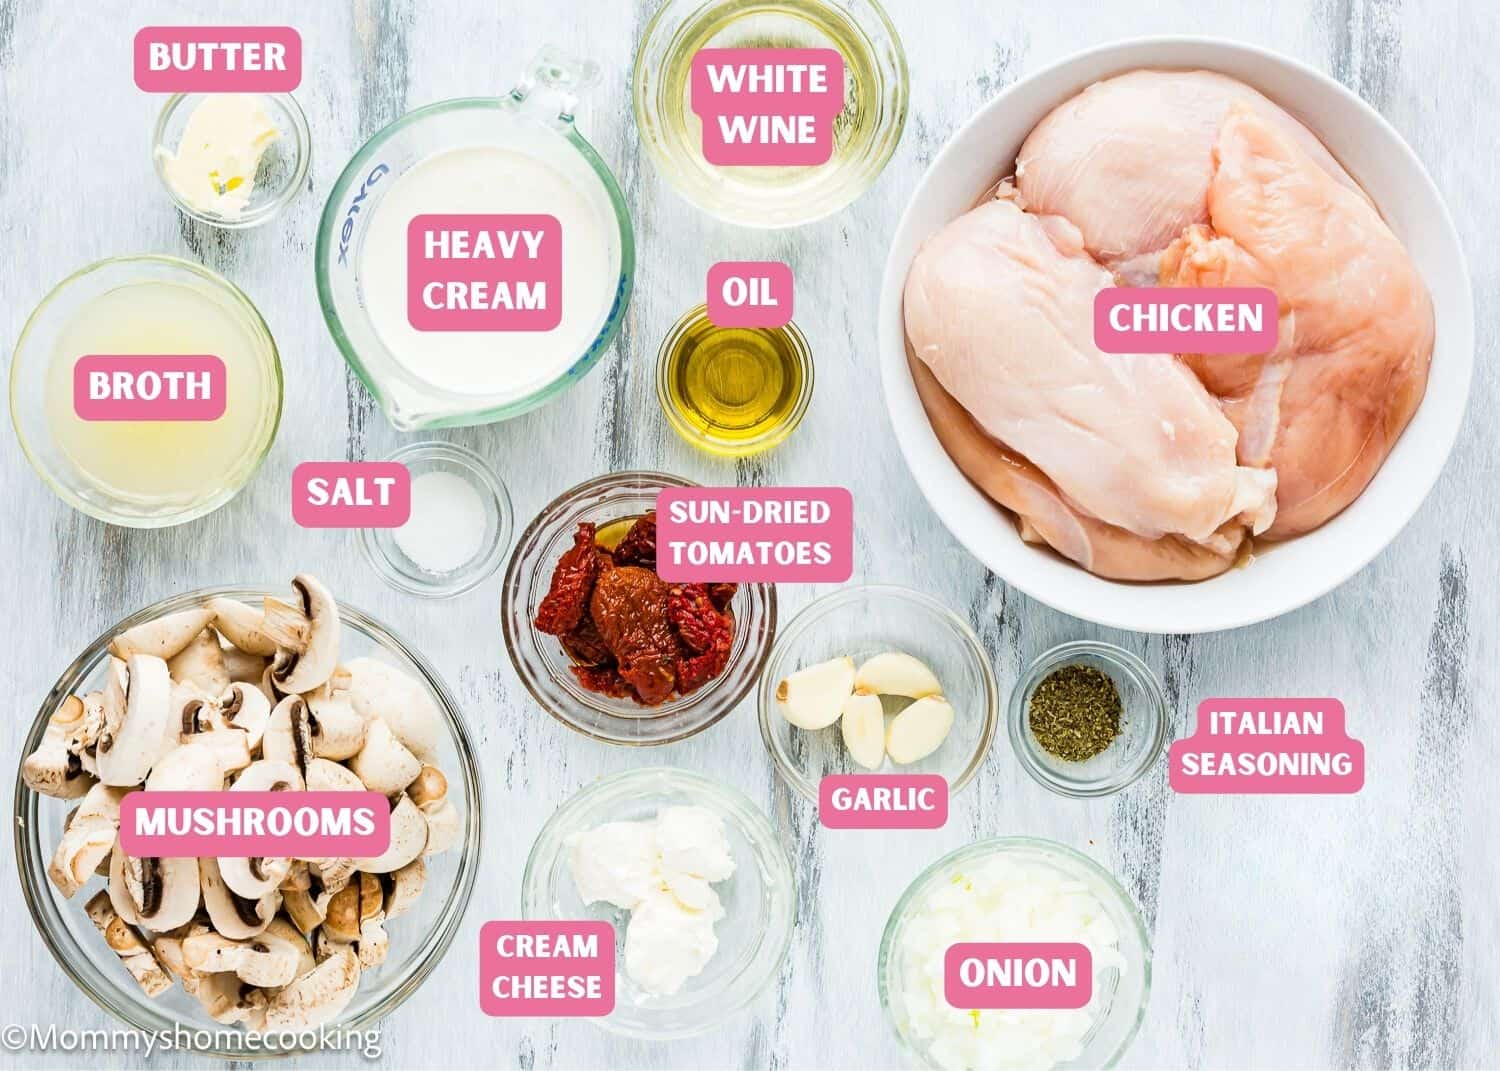 Ingredients needed to make One Pan Creamy Chicken and Mushrooms with name tags.